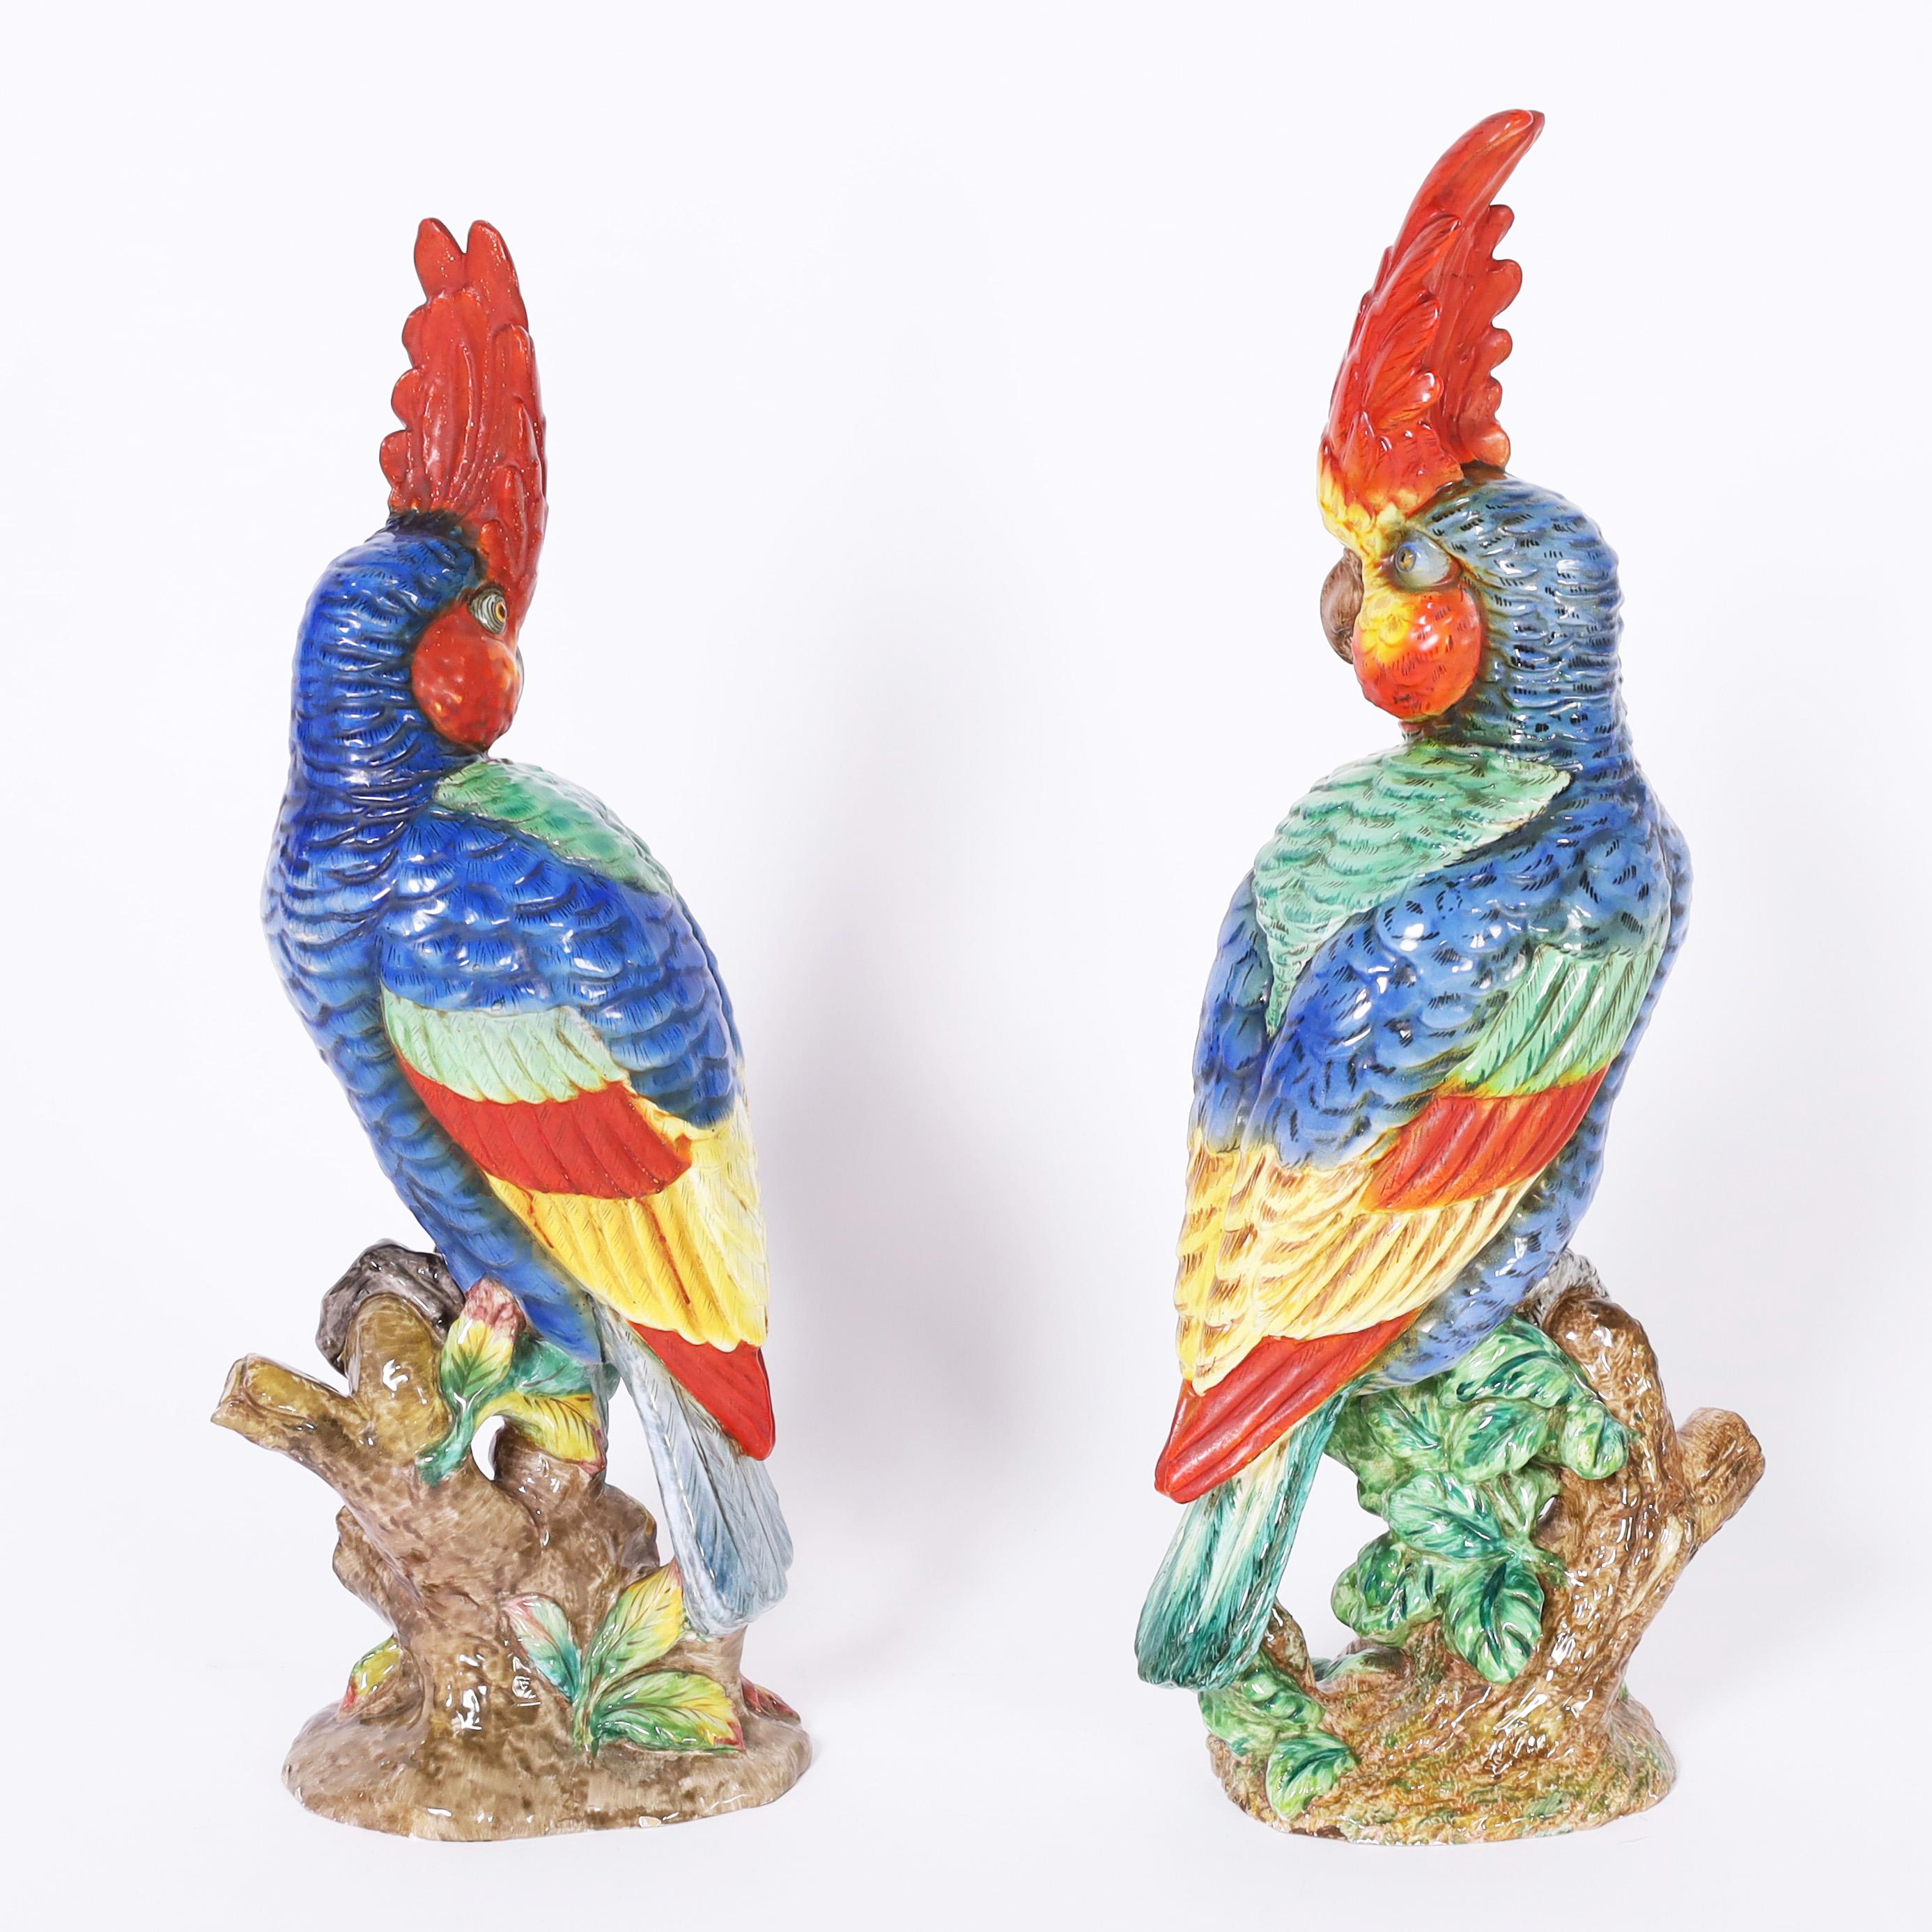 Striking pair of life size porcelain parrots perched on tree trunks, hand decorated with vivid tropical colors and signed Zaccognini on the bottom.

Left: H: 21.5 W: 8 D: 6
Right: H: 22.5 W: 9 D: 6